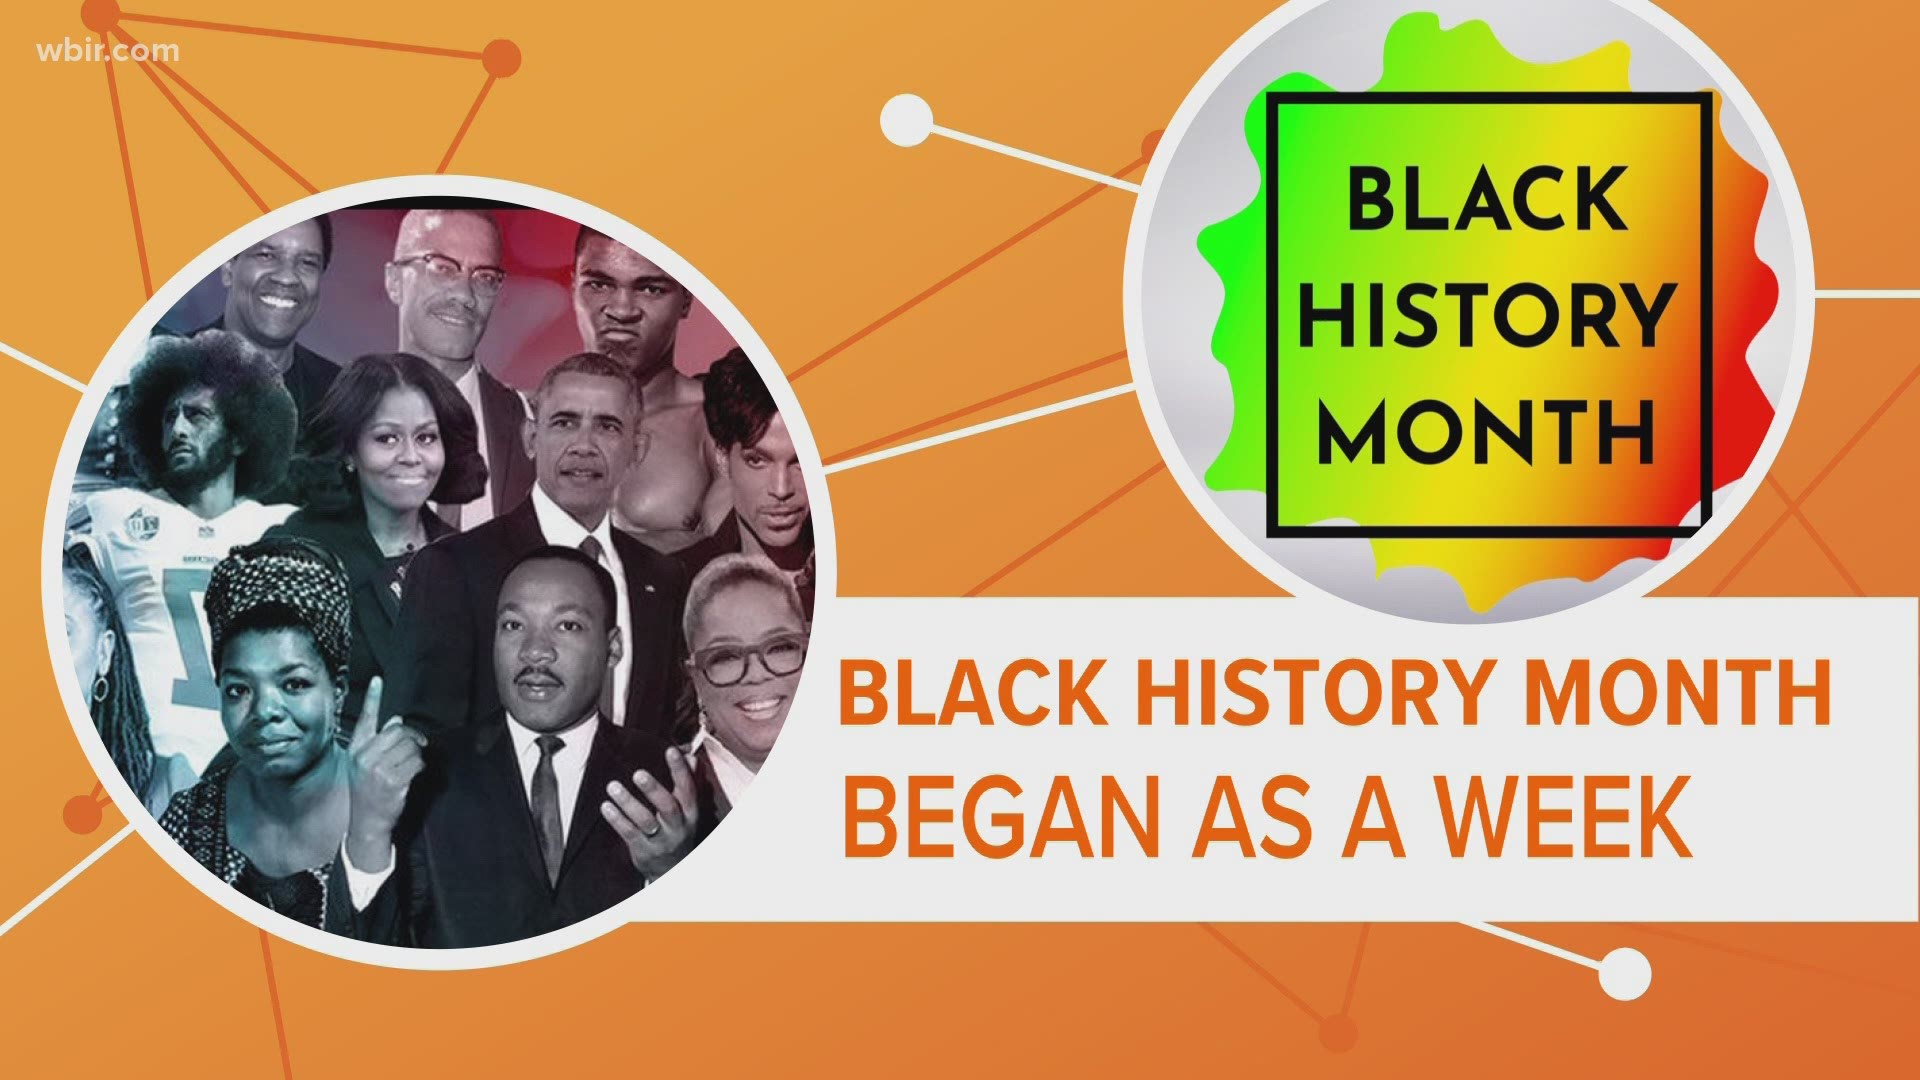 In the beginning what we know as "Black History month" was only a week. Let's connect the dots.